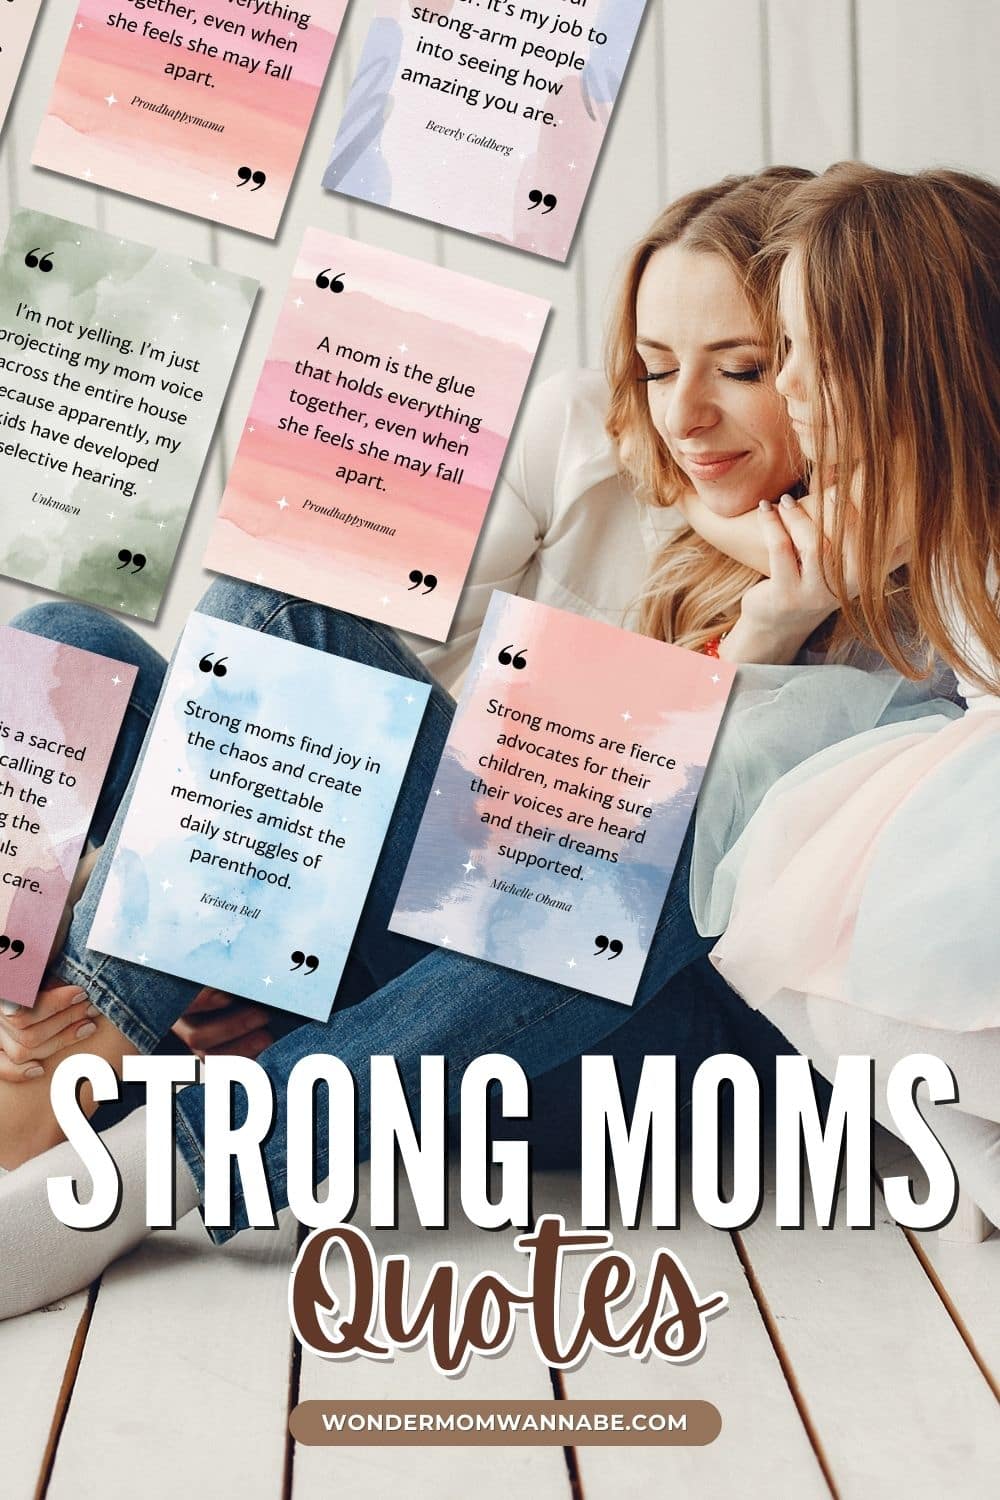 Get inspired by these powerful and uplifting strong mom quotes, now available in a printable format. These heartfelt words are perfect for reminding yourself or gifting to other strong moms in your life.